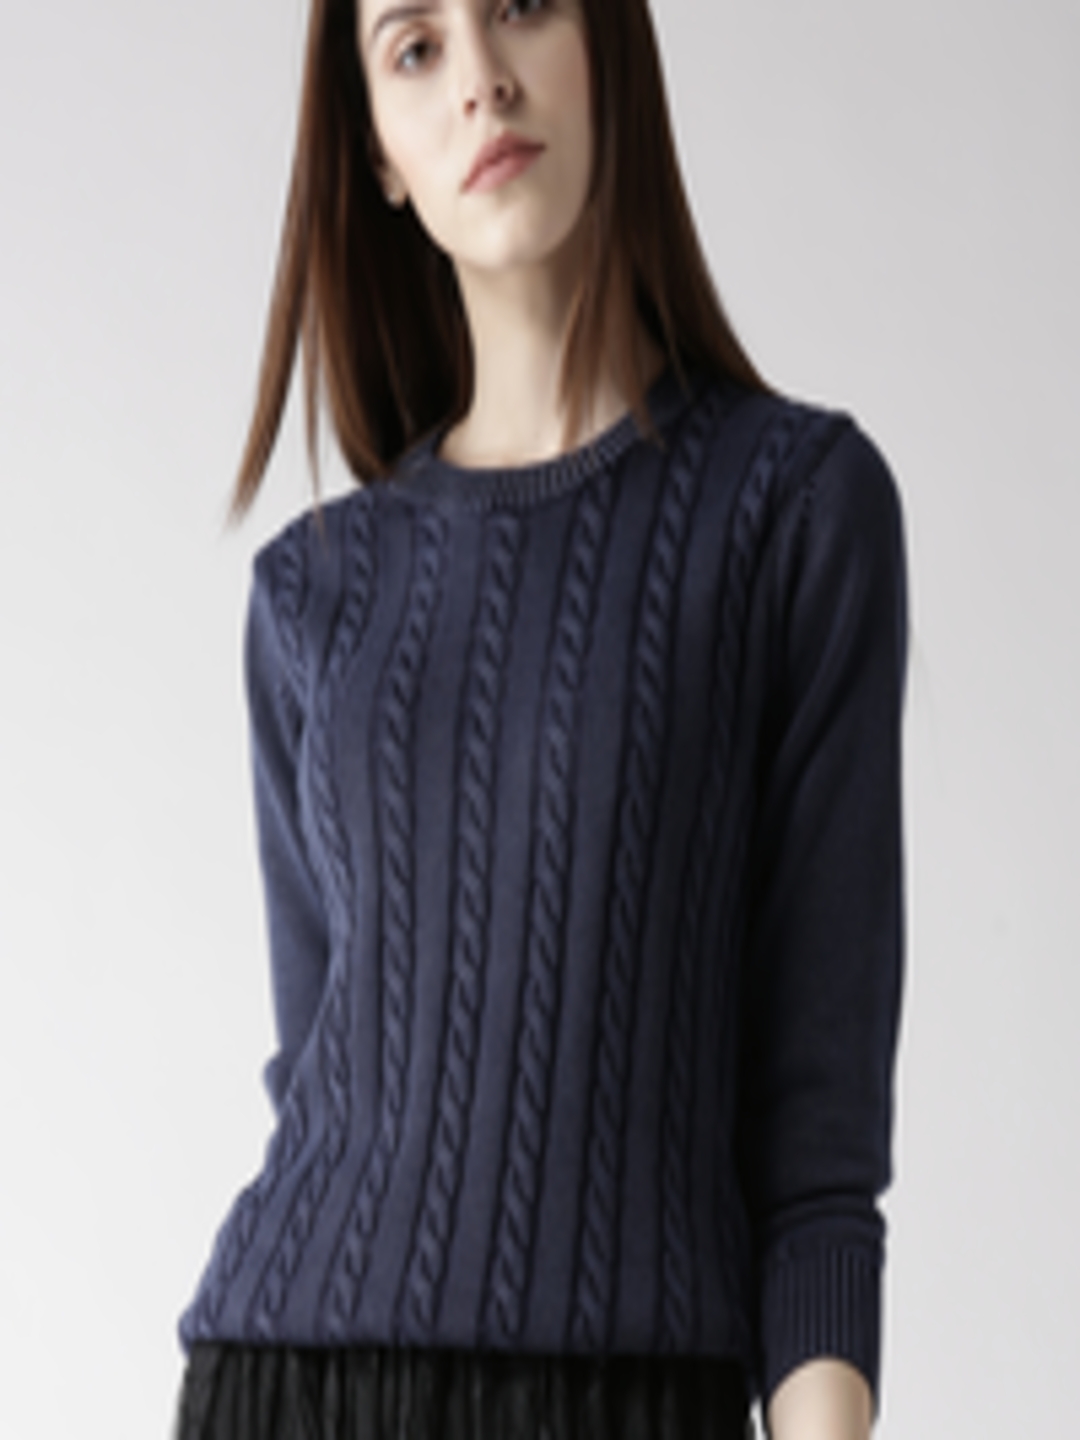 Buy Mast & Harbour Women Navy Blue Cable Knit Sweater - Sweaters for ...